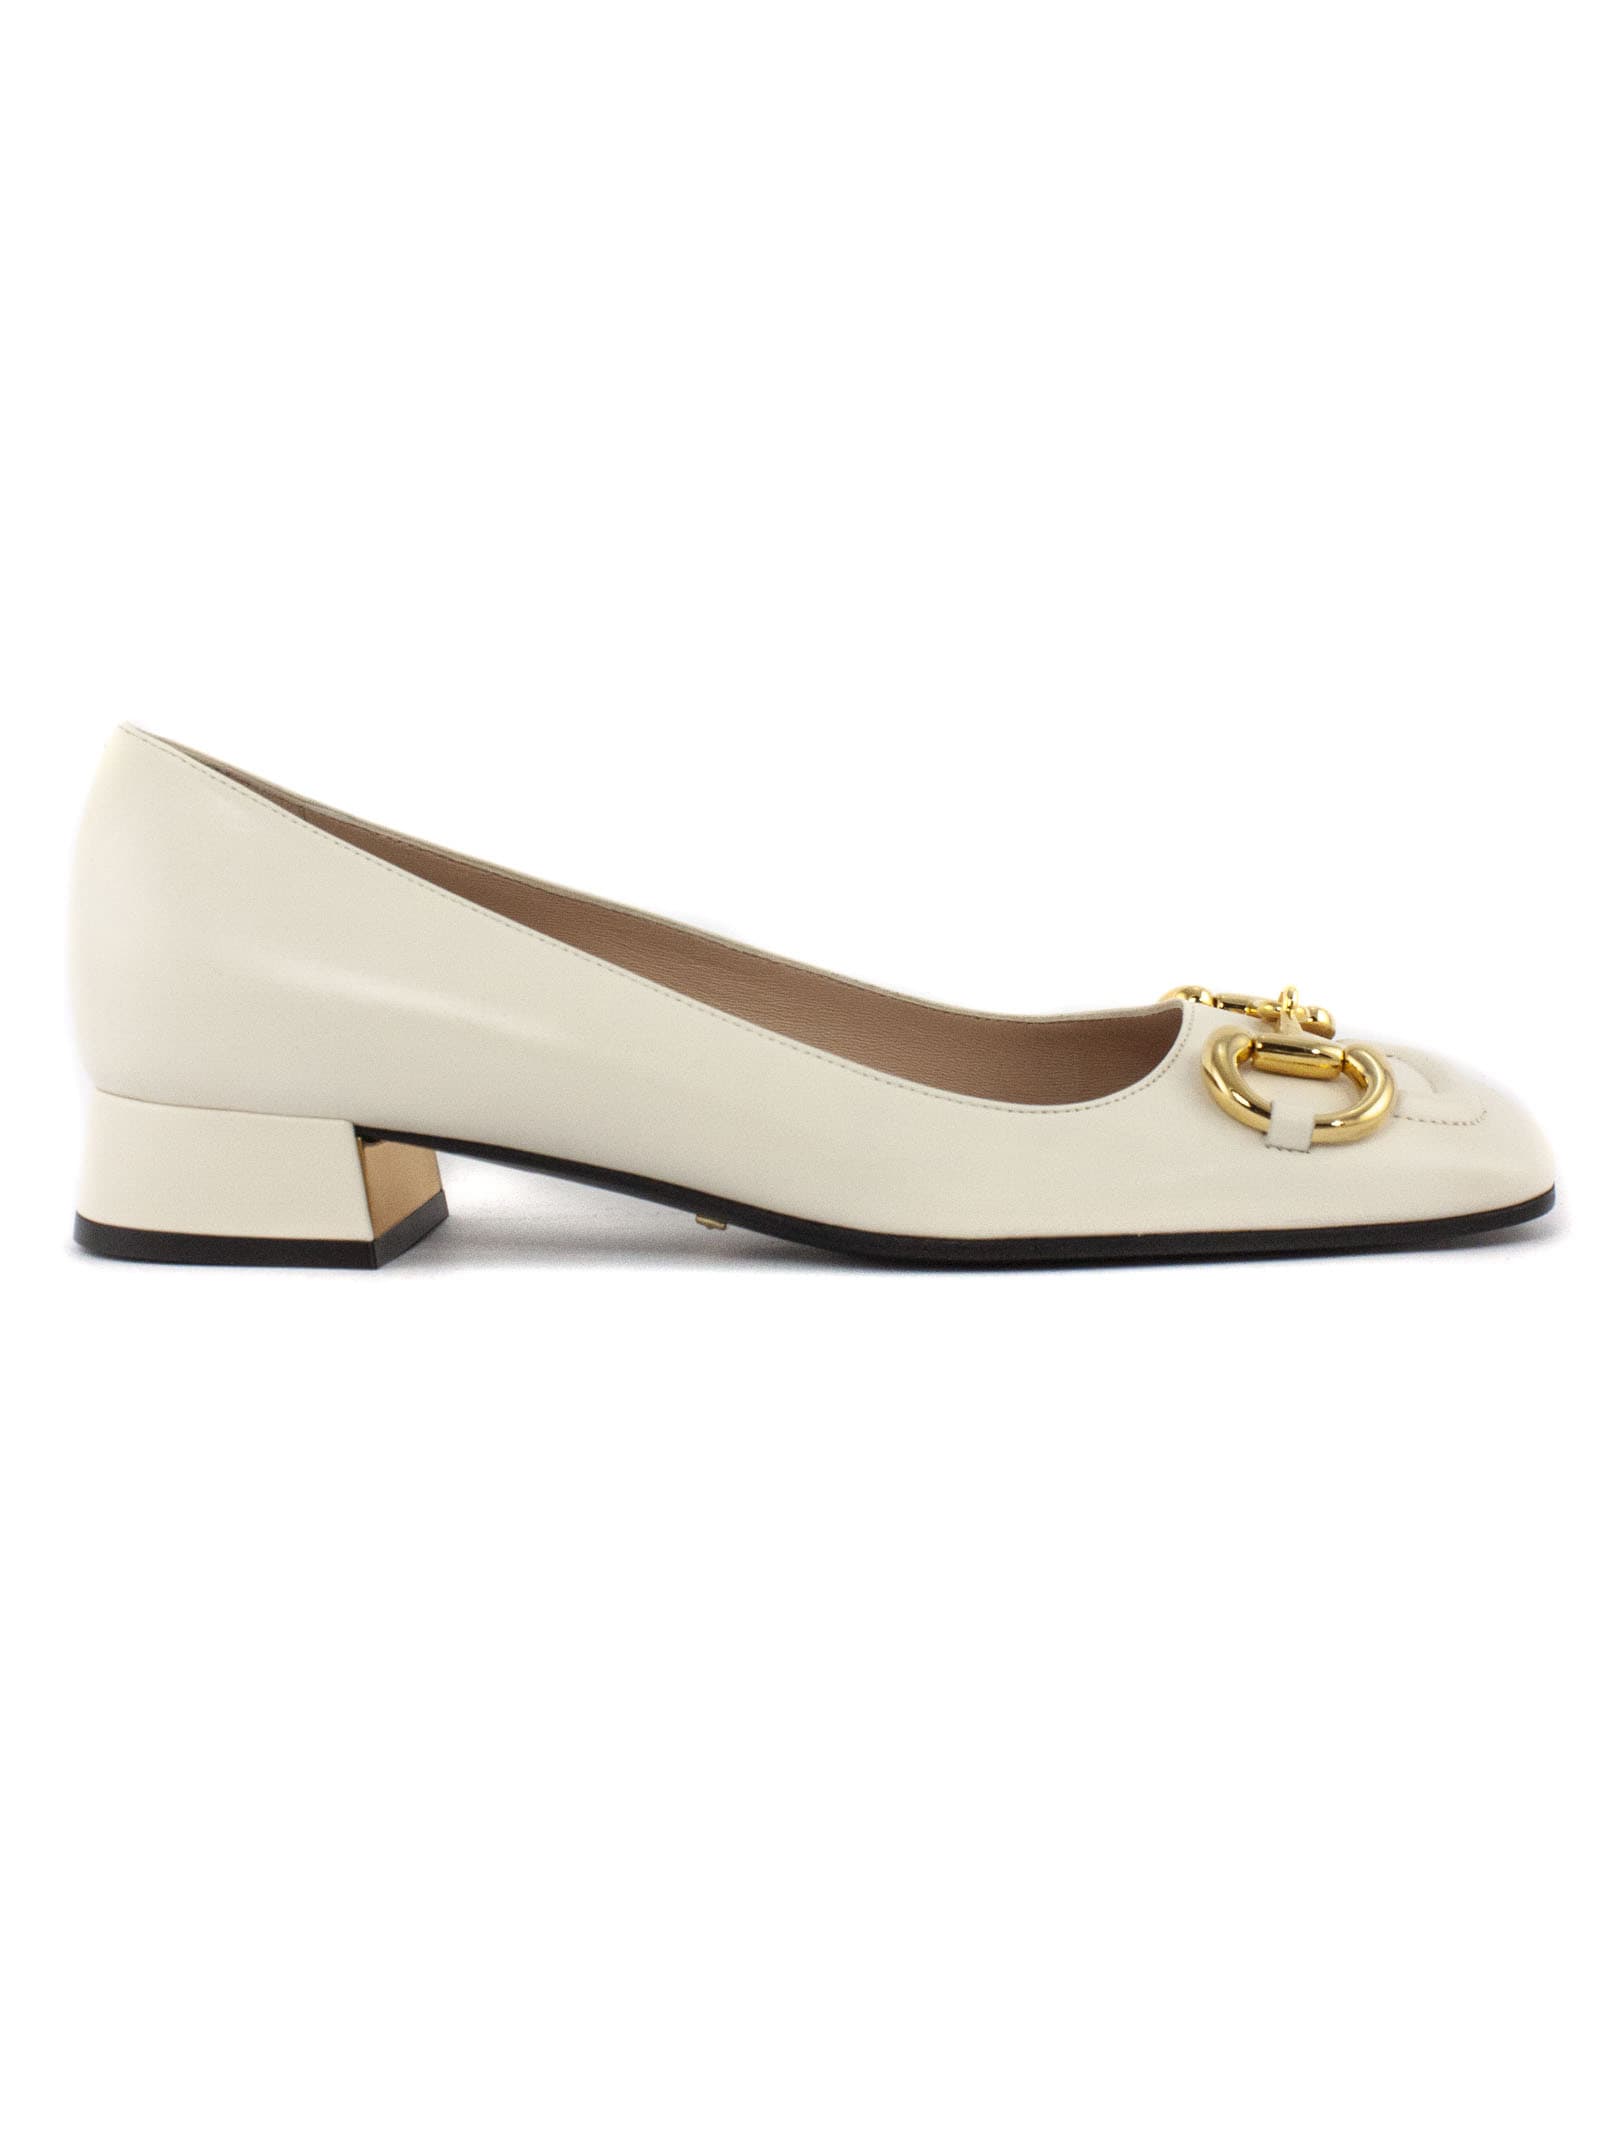 GUCCI CREAM LEATHER BALLET FLAT,11812933